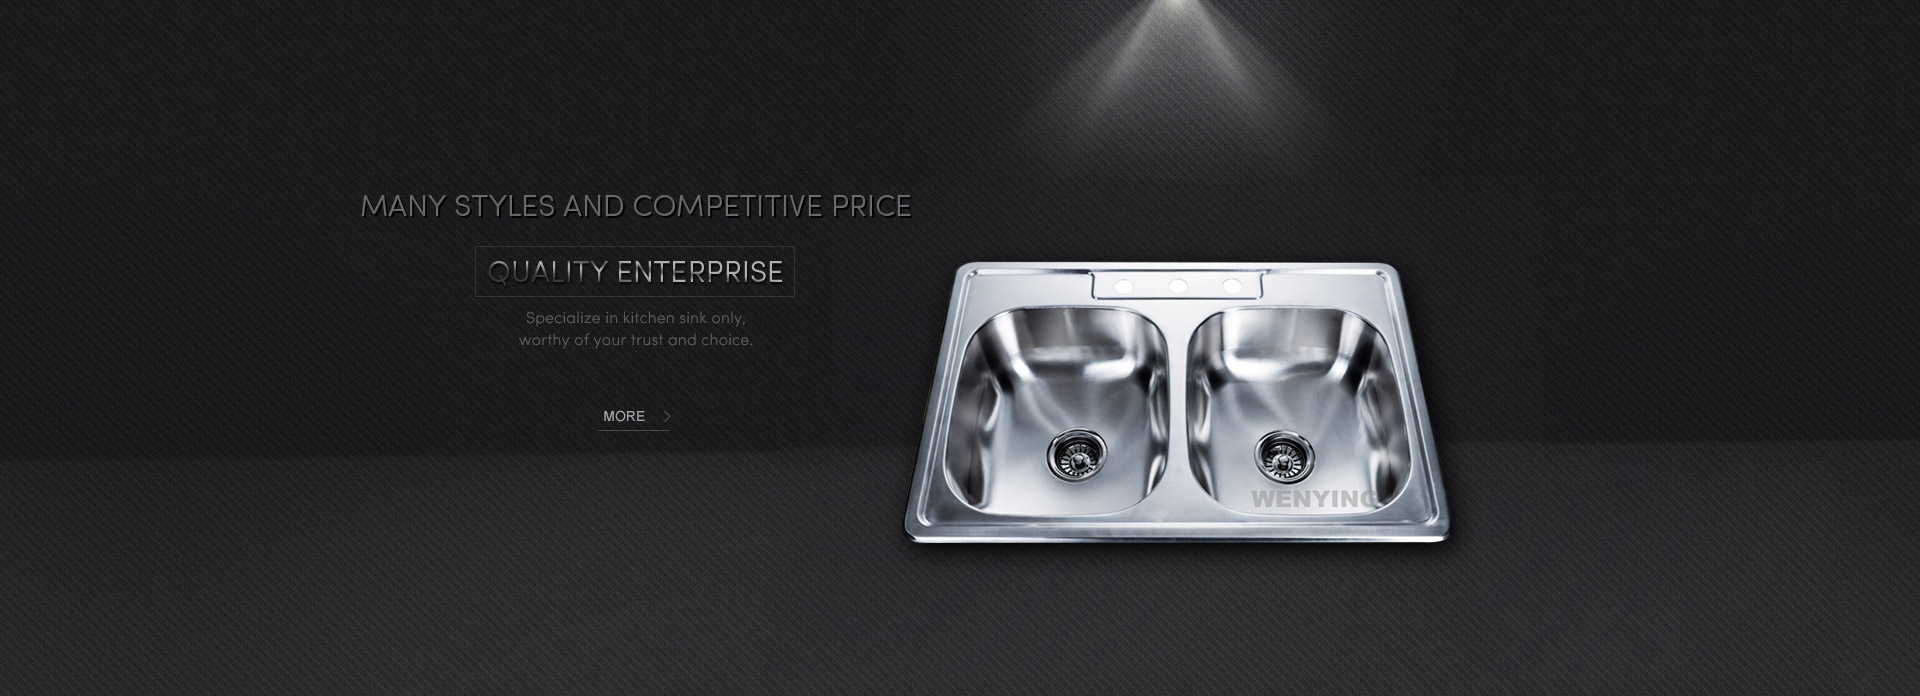 Specialize in kitchen sink only,worthy of your trust and choice.